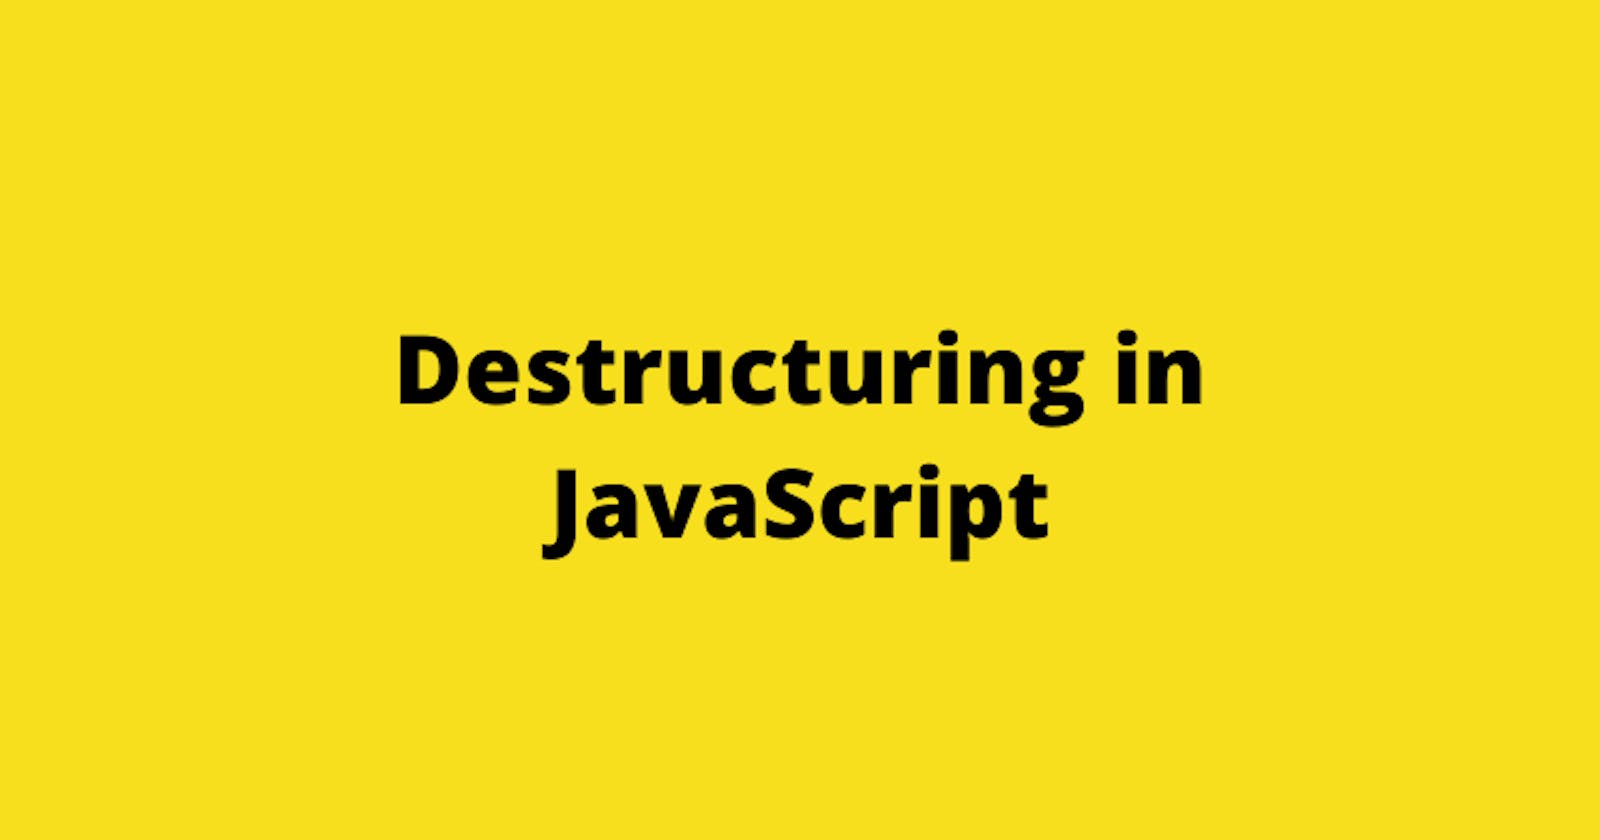 Introduction to Destructuring in JavaScript